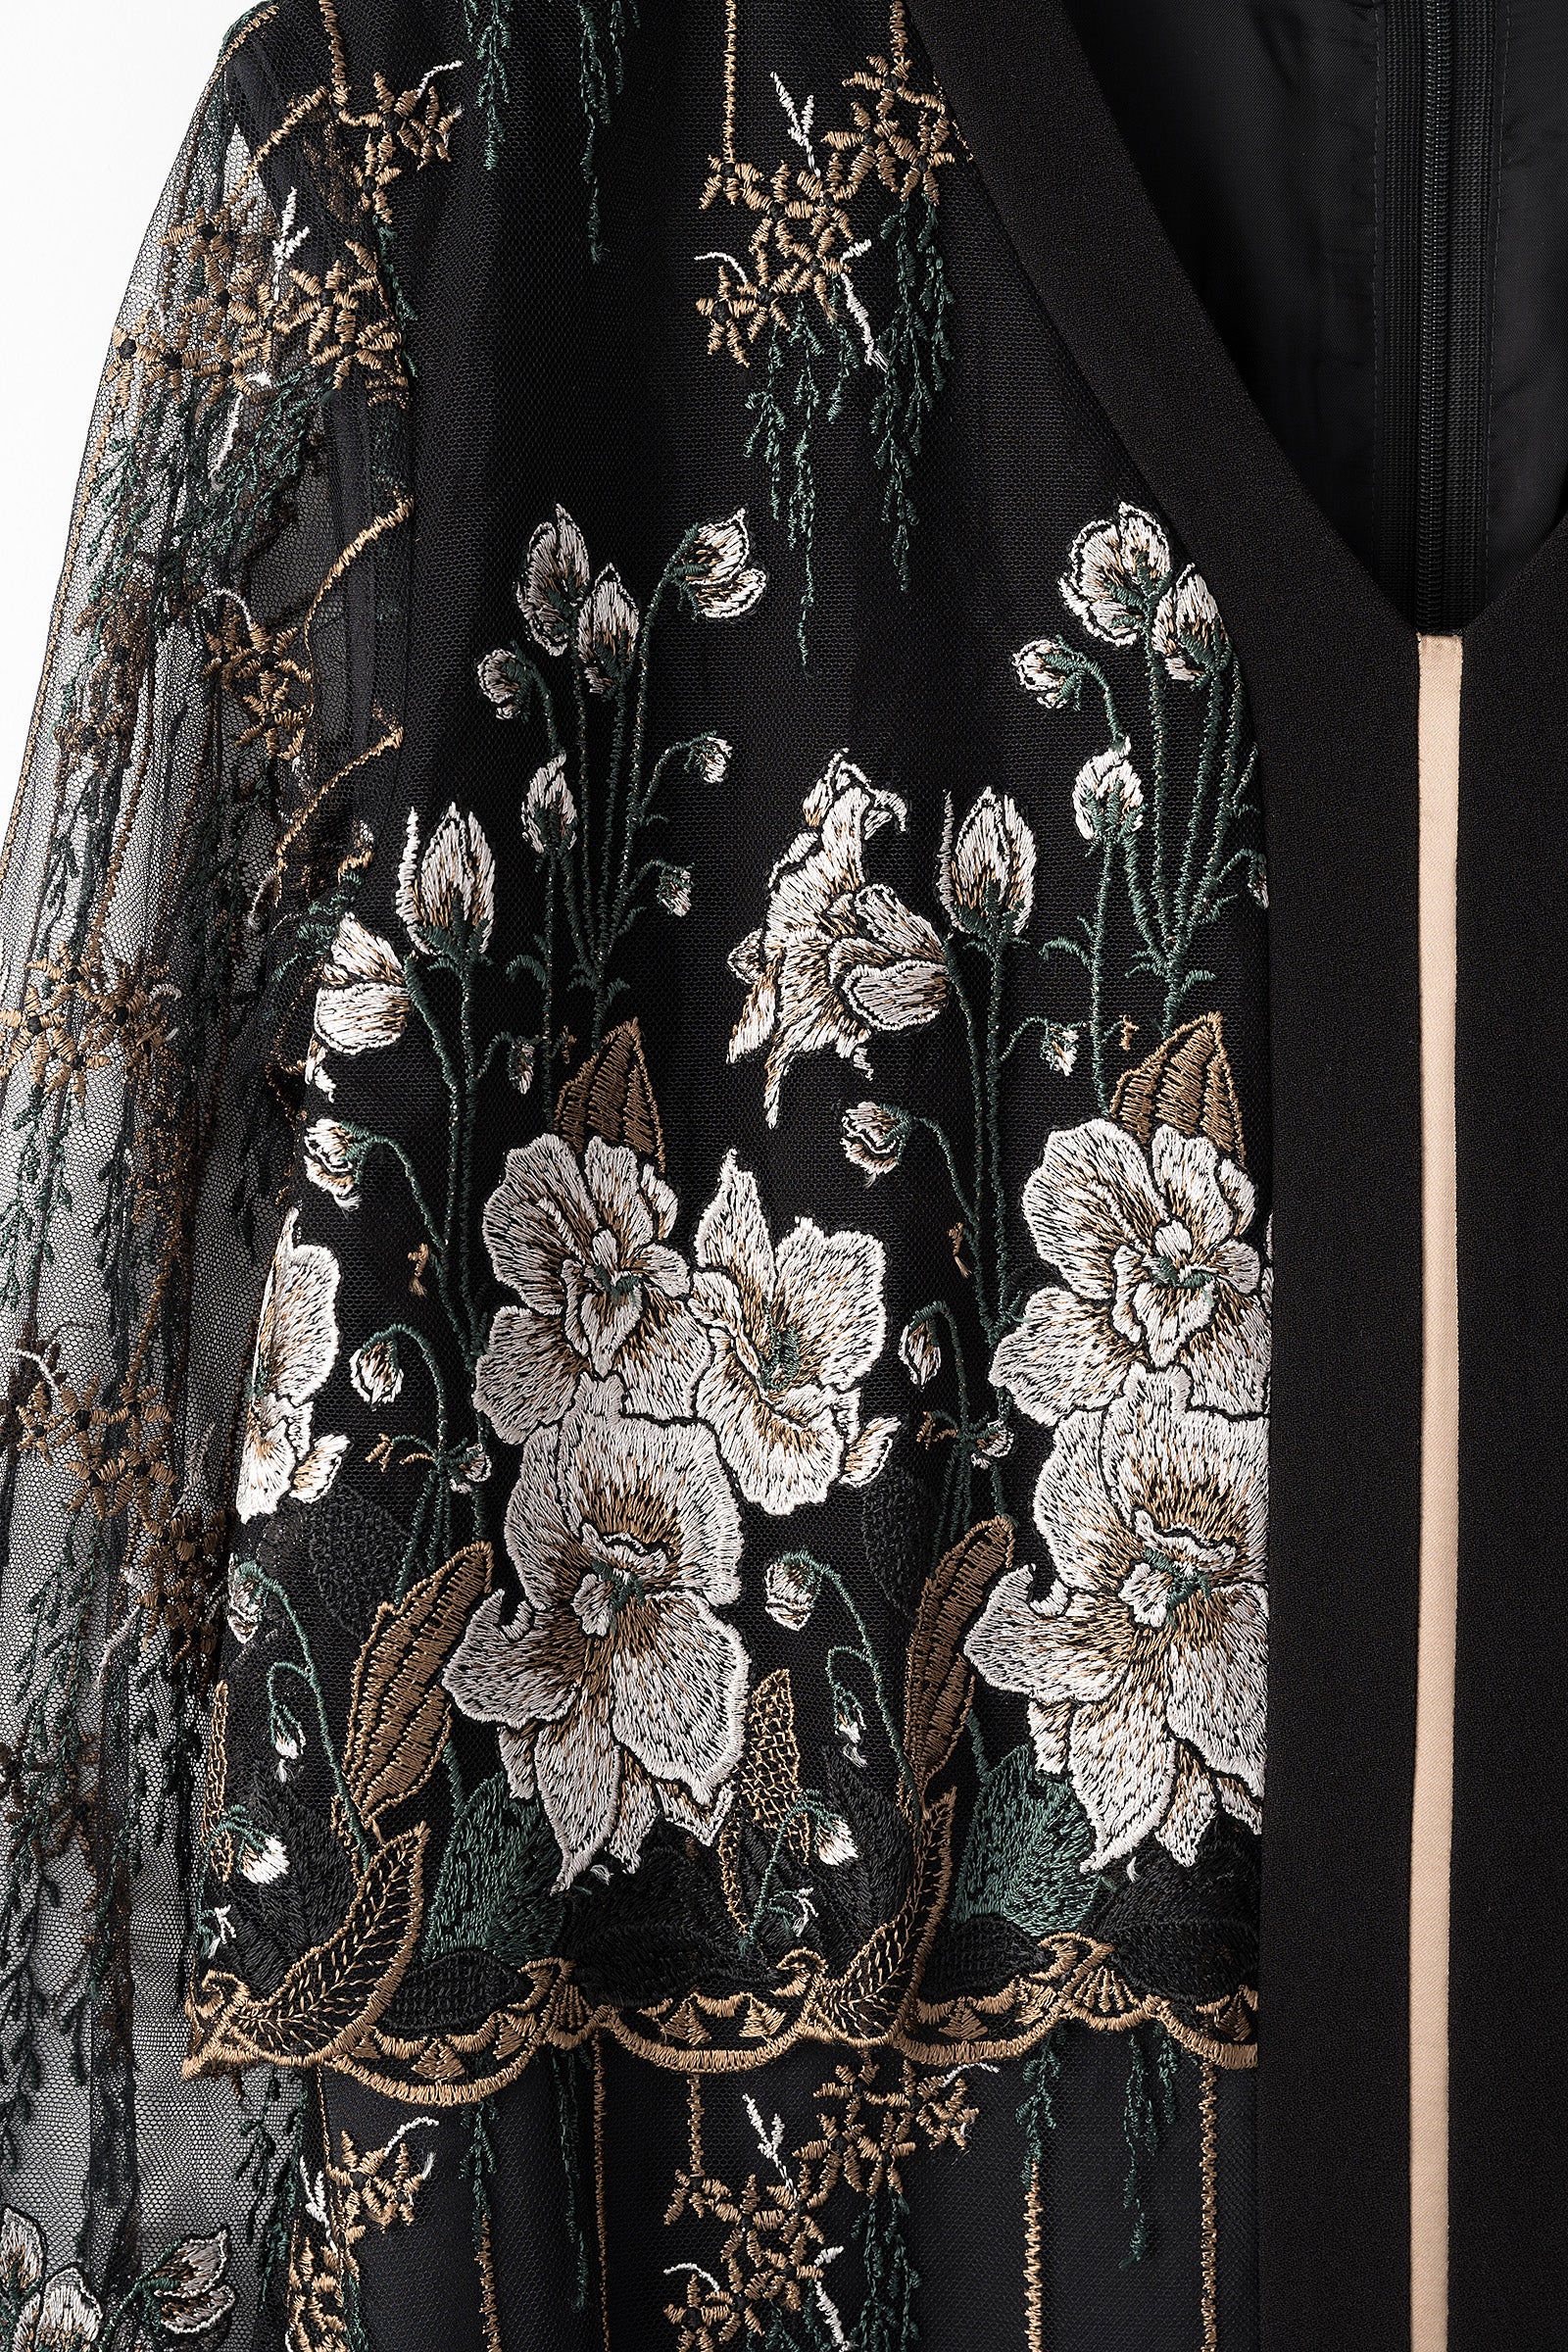 Everlasting embroidery lace dress (Black)